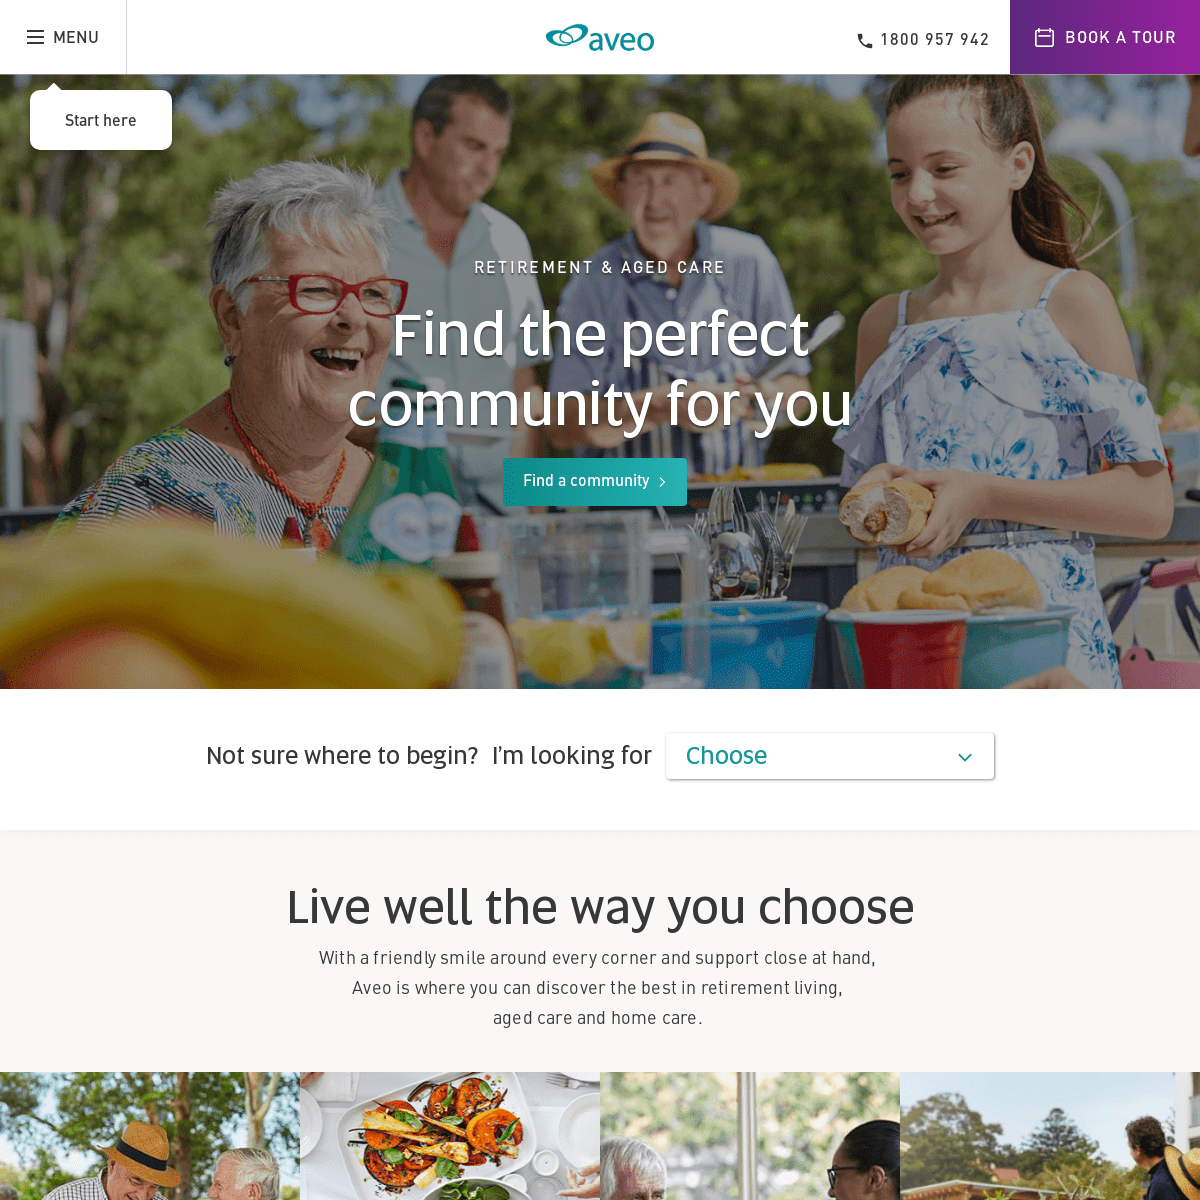 Aveo Retirement & Aged Care - Find The Perfect Community For You